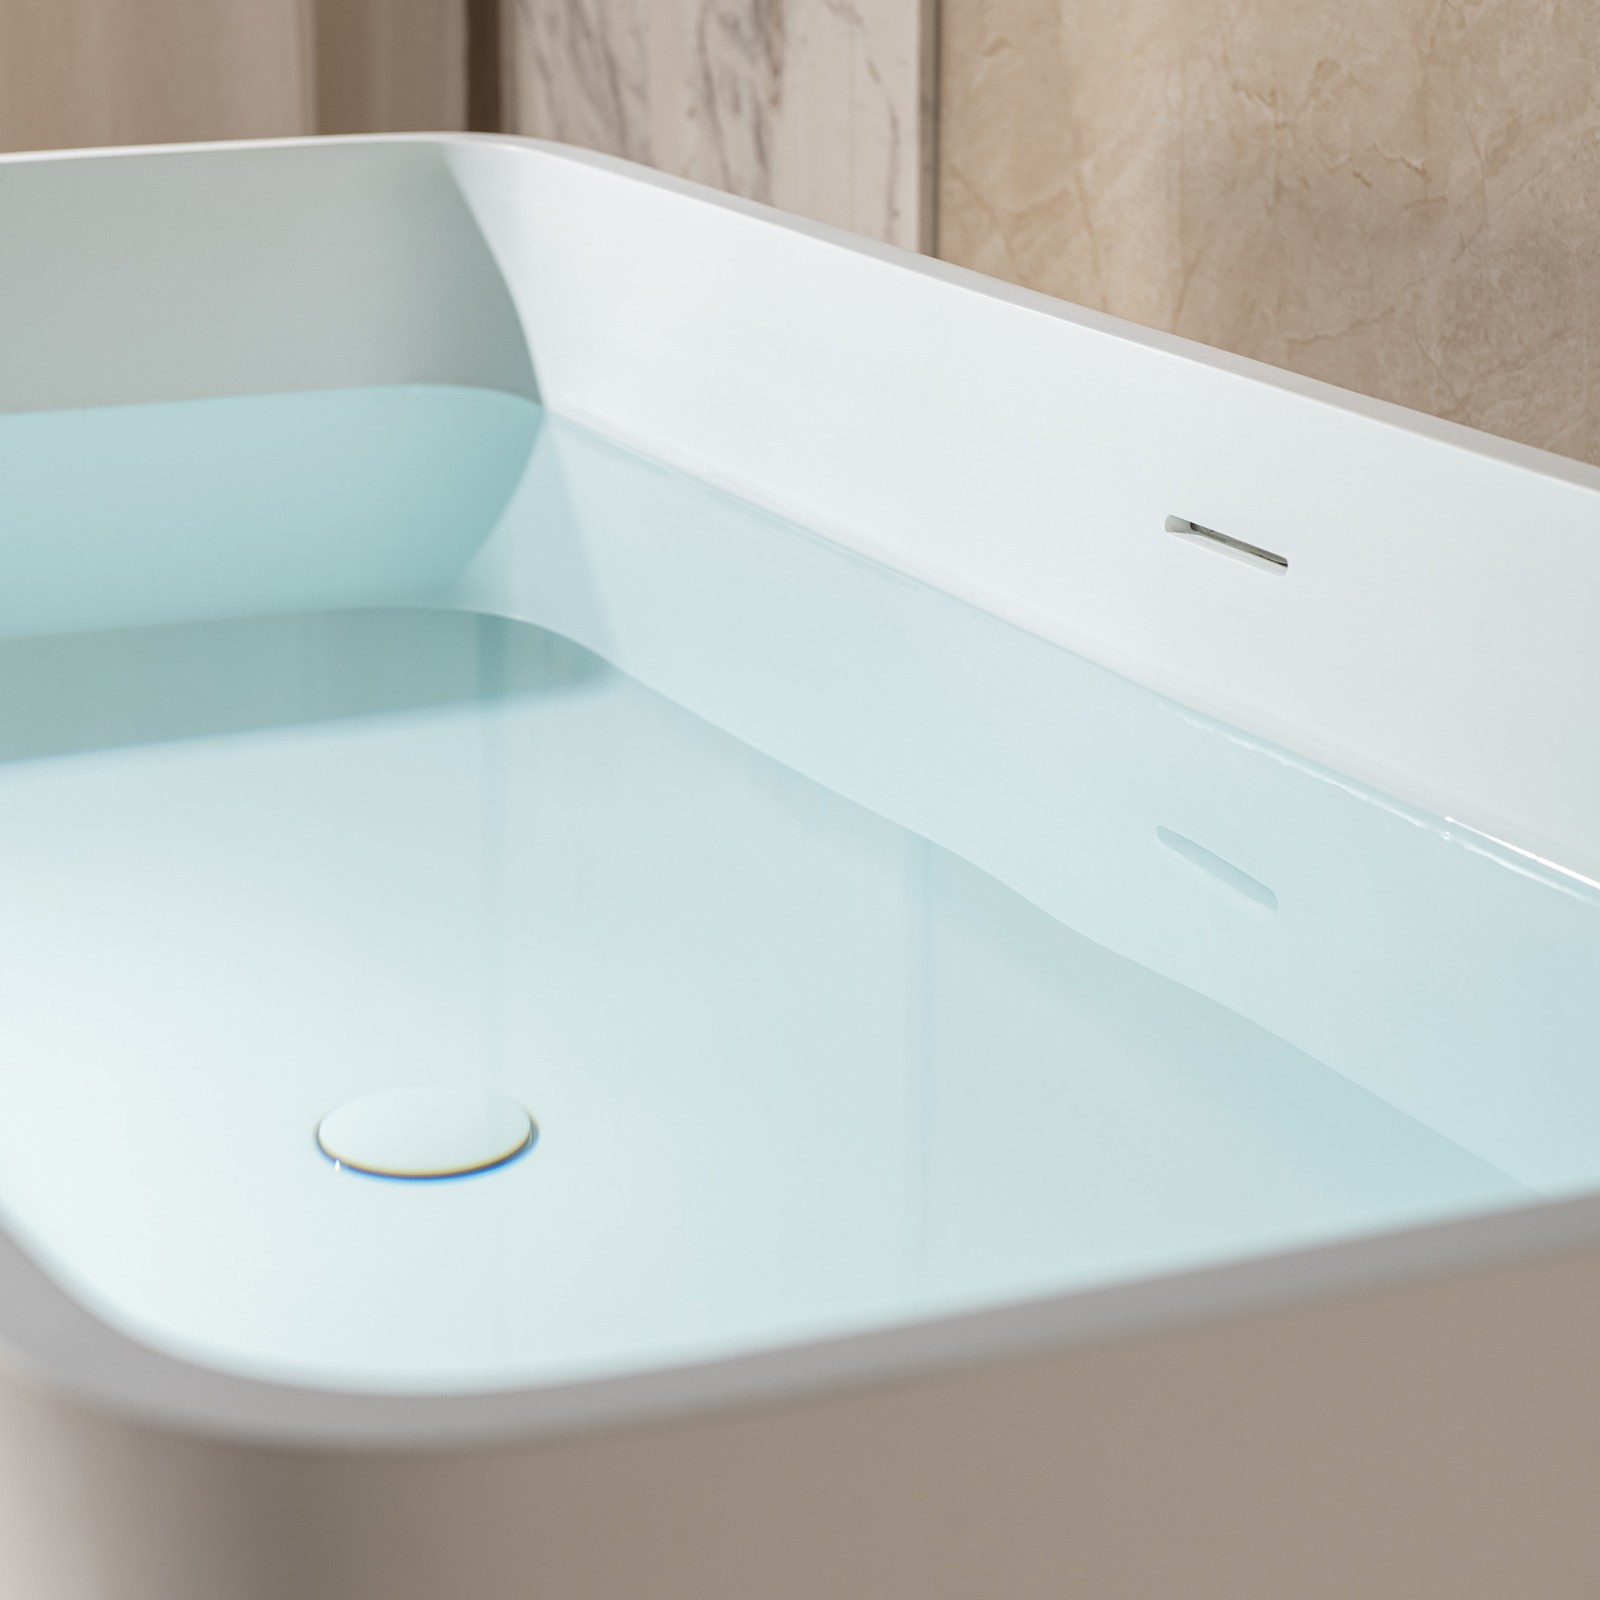  WOODBRIDGE 59 in. x 27.5 in. Luxury Contemporary Solid Surface Freestanding Bathtub in Matte White_12